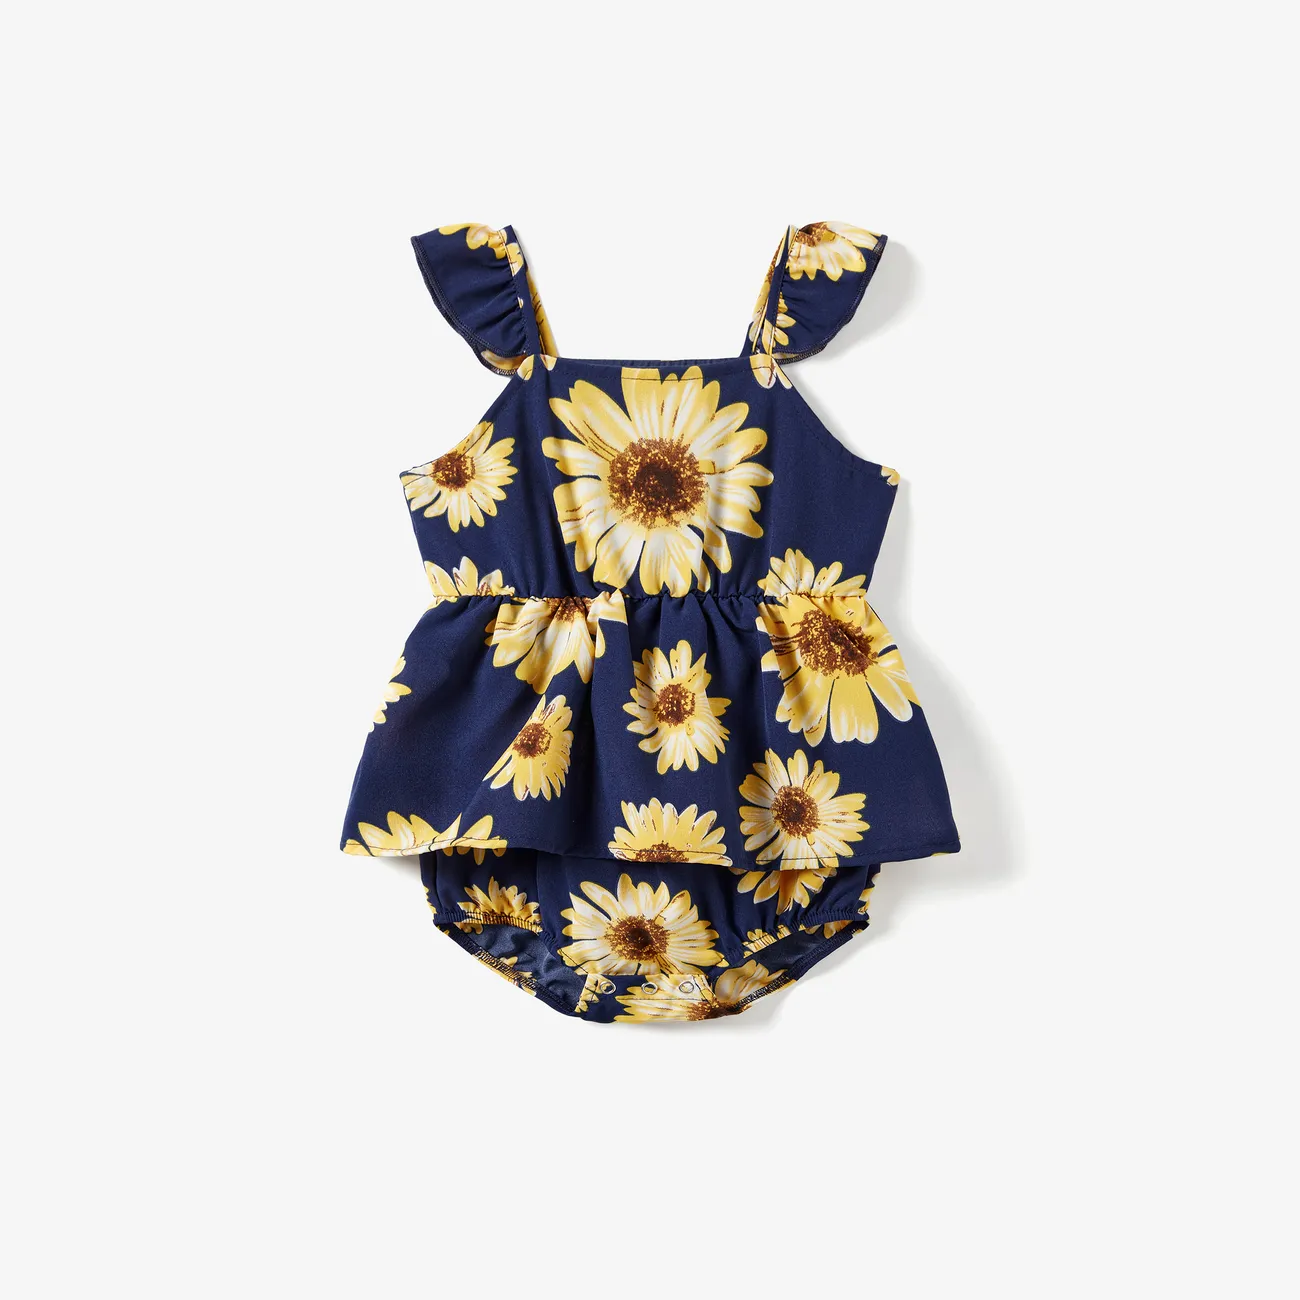 Family Matching Solid Color Tee and Sunflower Pattern Button Belted Flowy Strap Dress Sets Black big image 1